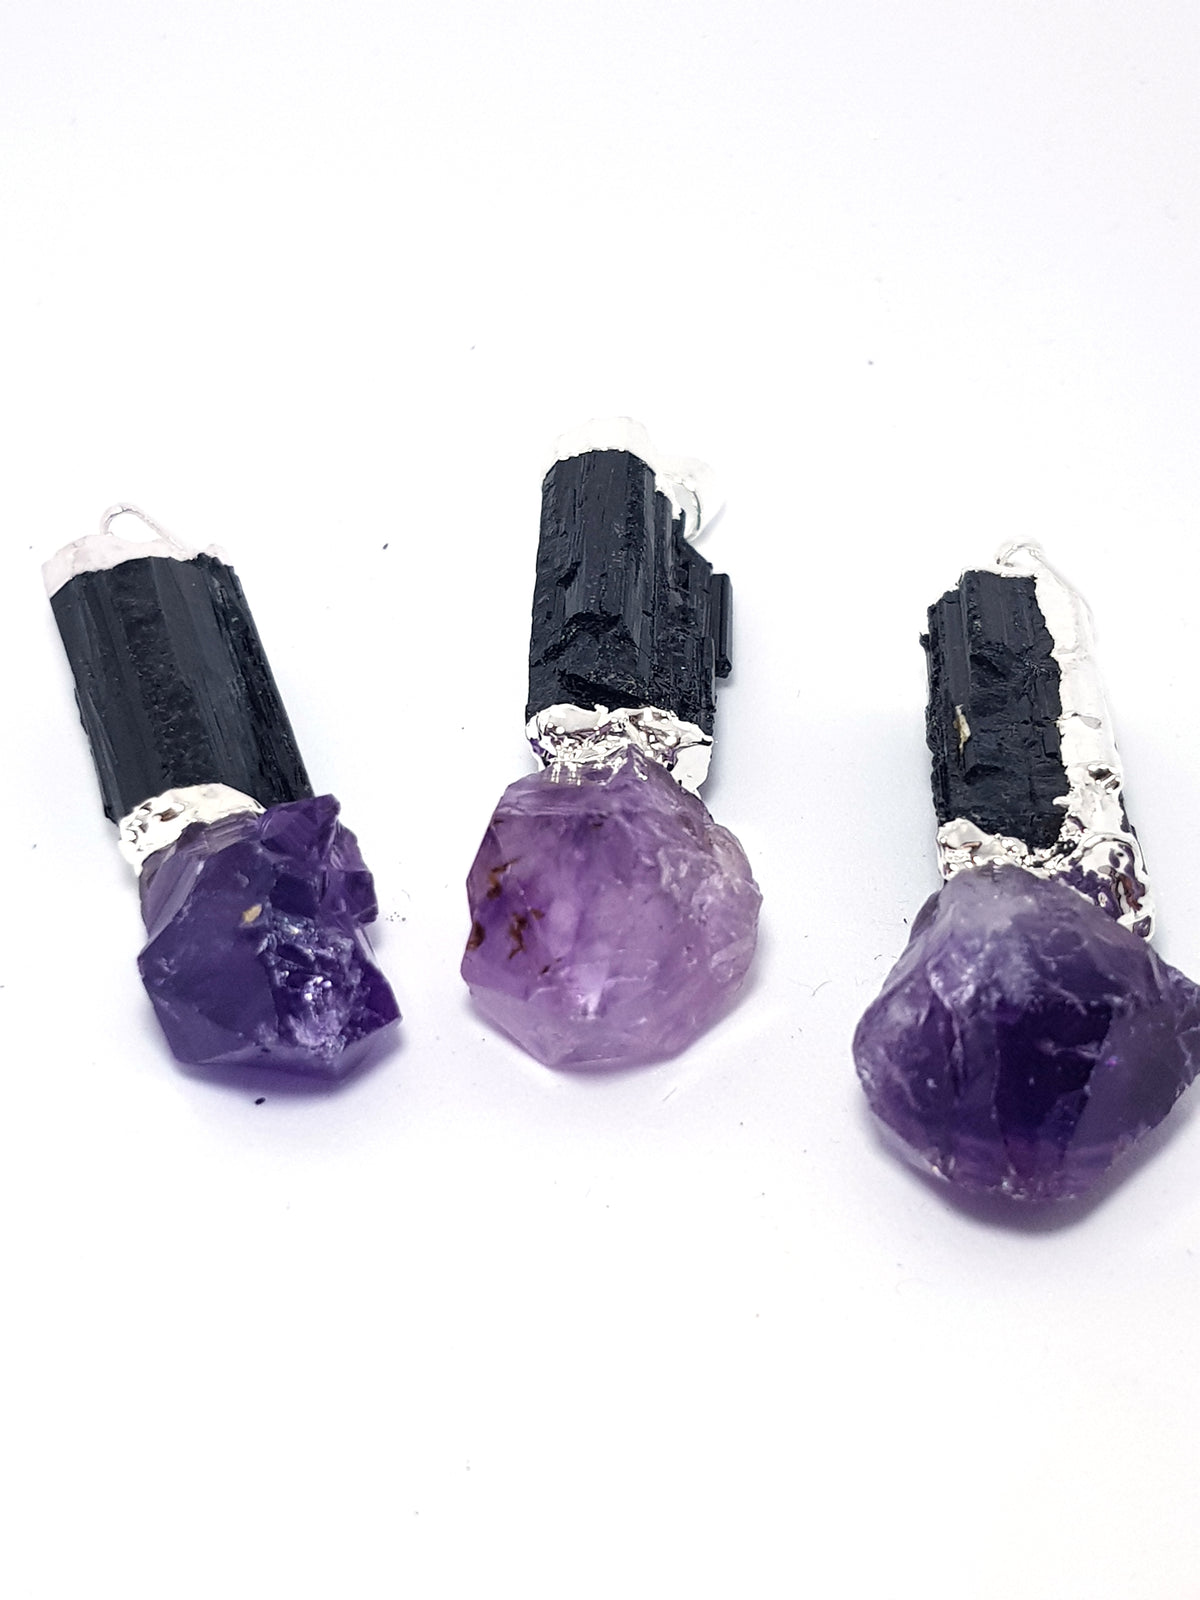 Amethyst and black tourmaline pendant - The Science of Magic 